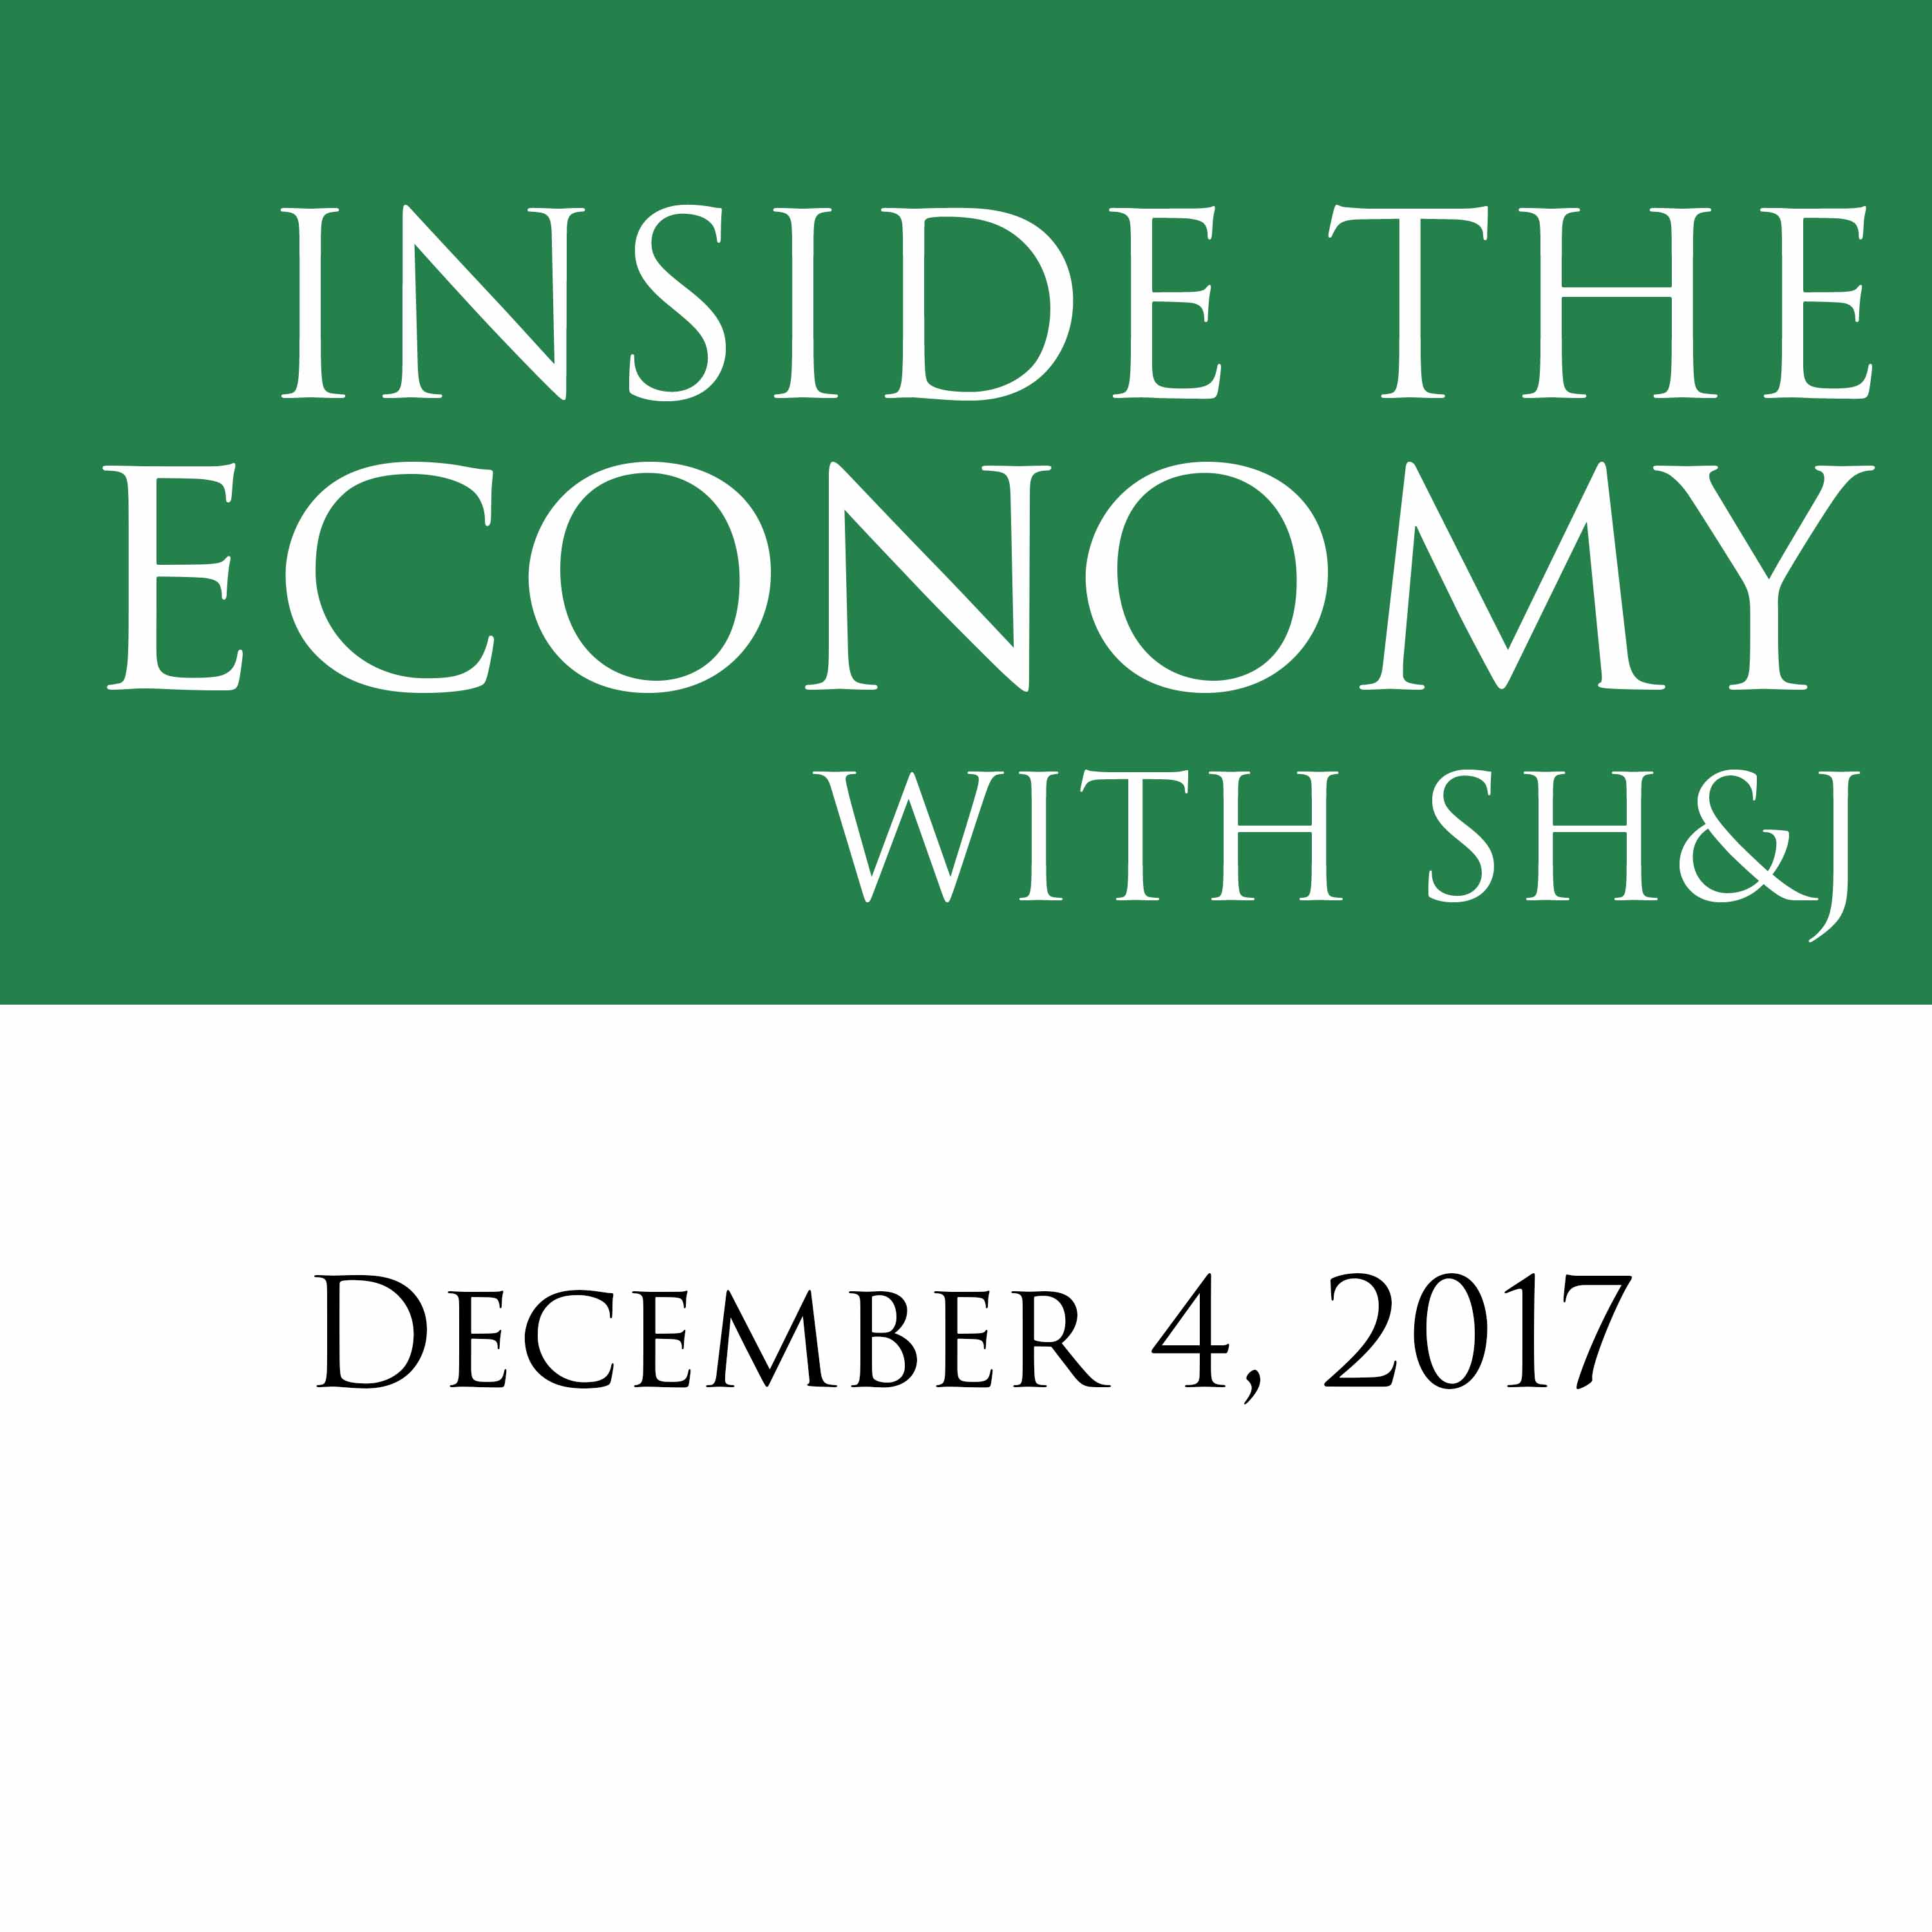 Inside the Economy w/ SH&J: Could a rise in oil prices lead to the next recession?